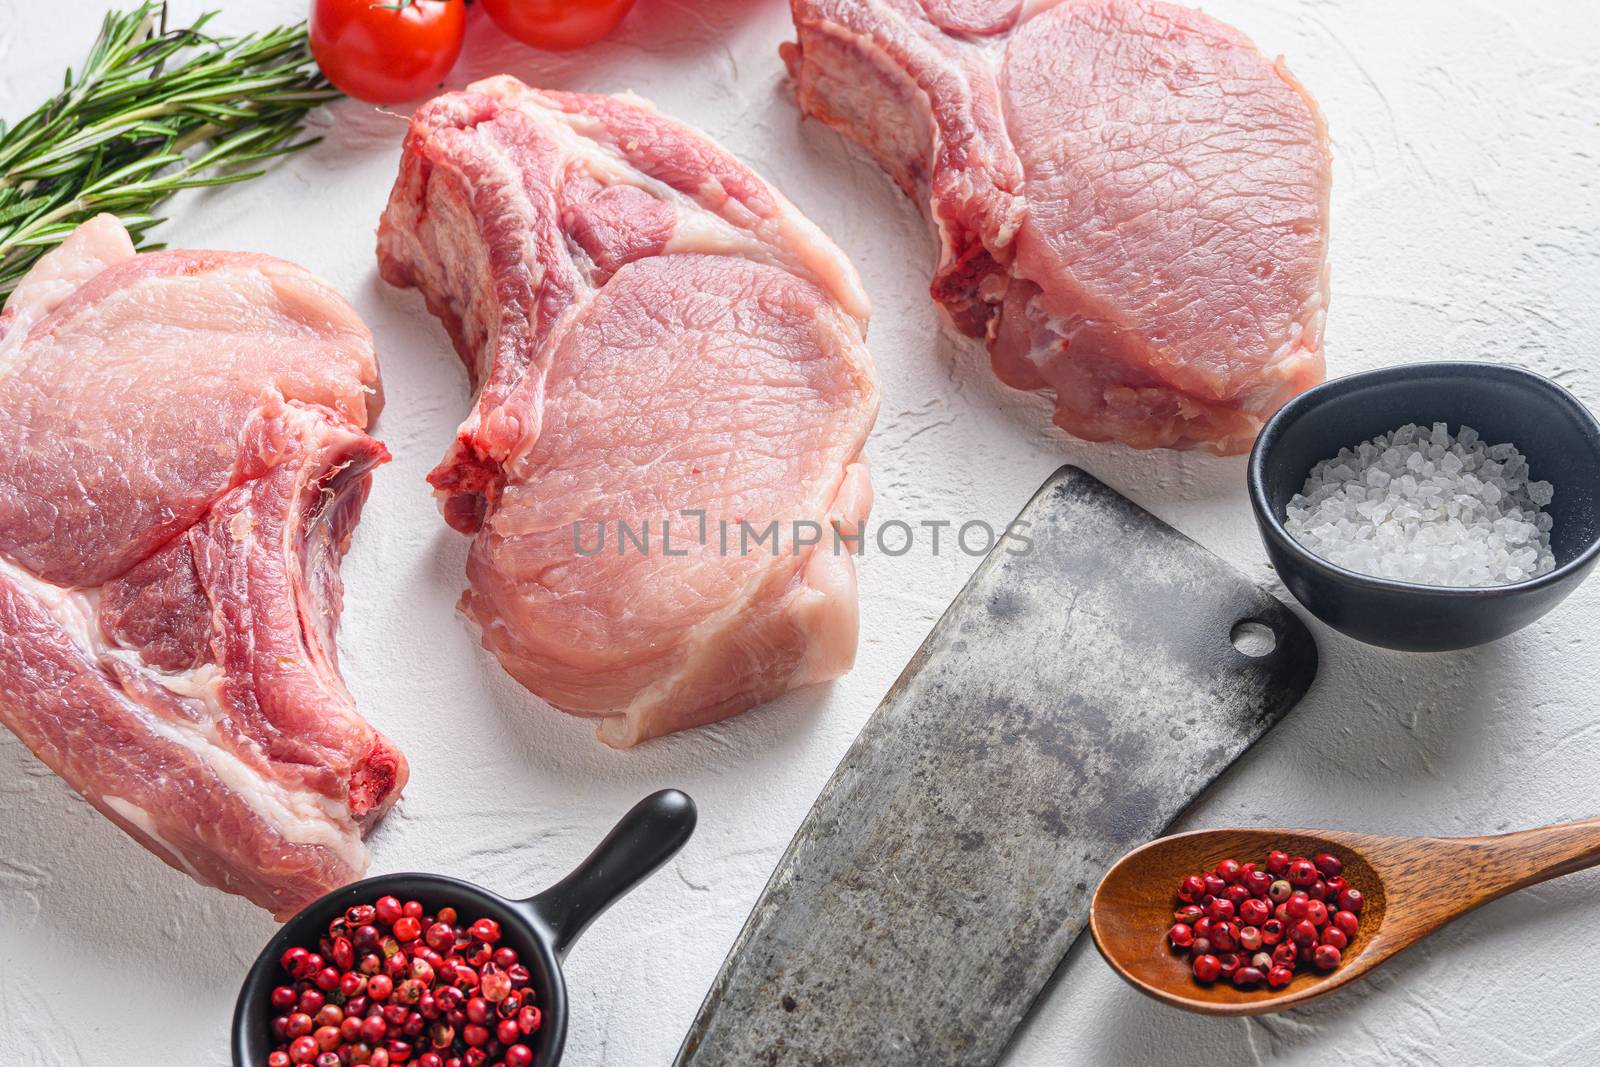 Set for bio grilling butcher american cleaver over organic bio Raw pork chops , baking or frying, textured white background. horizontal space for text. Top view.